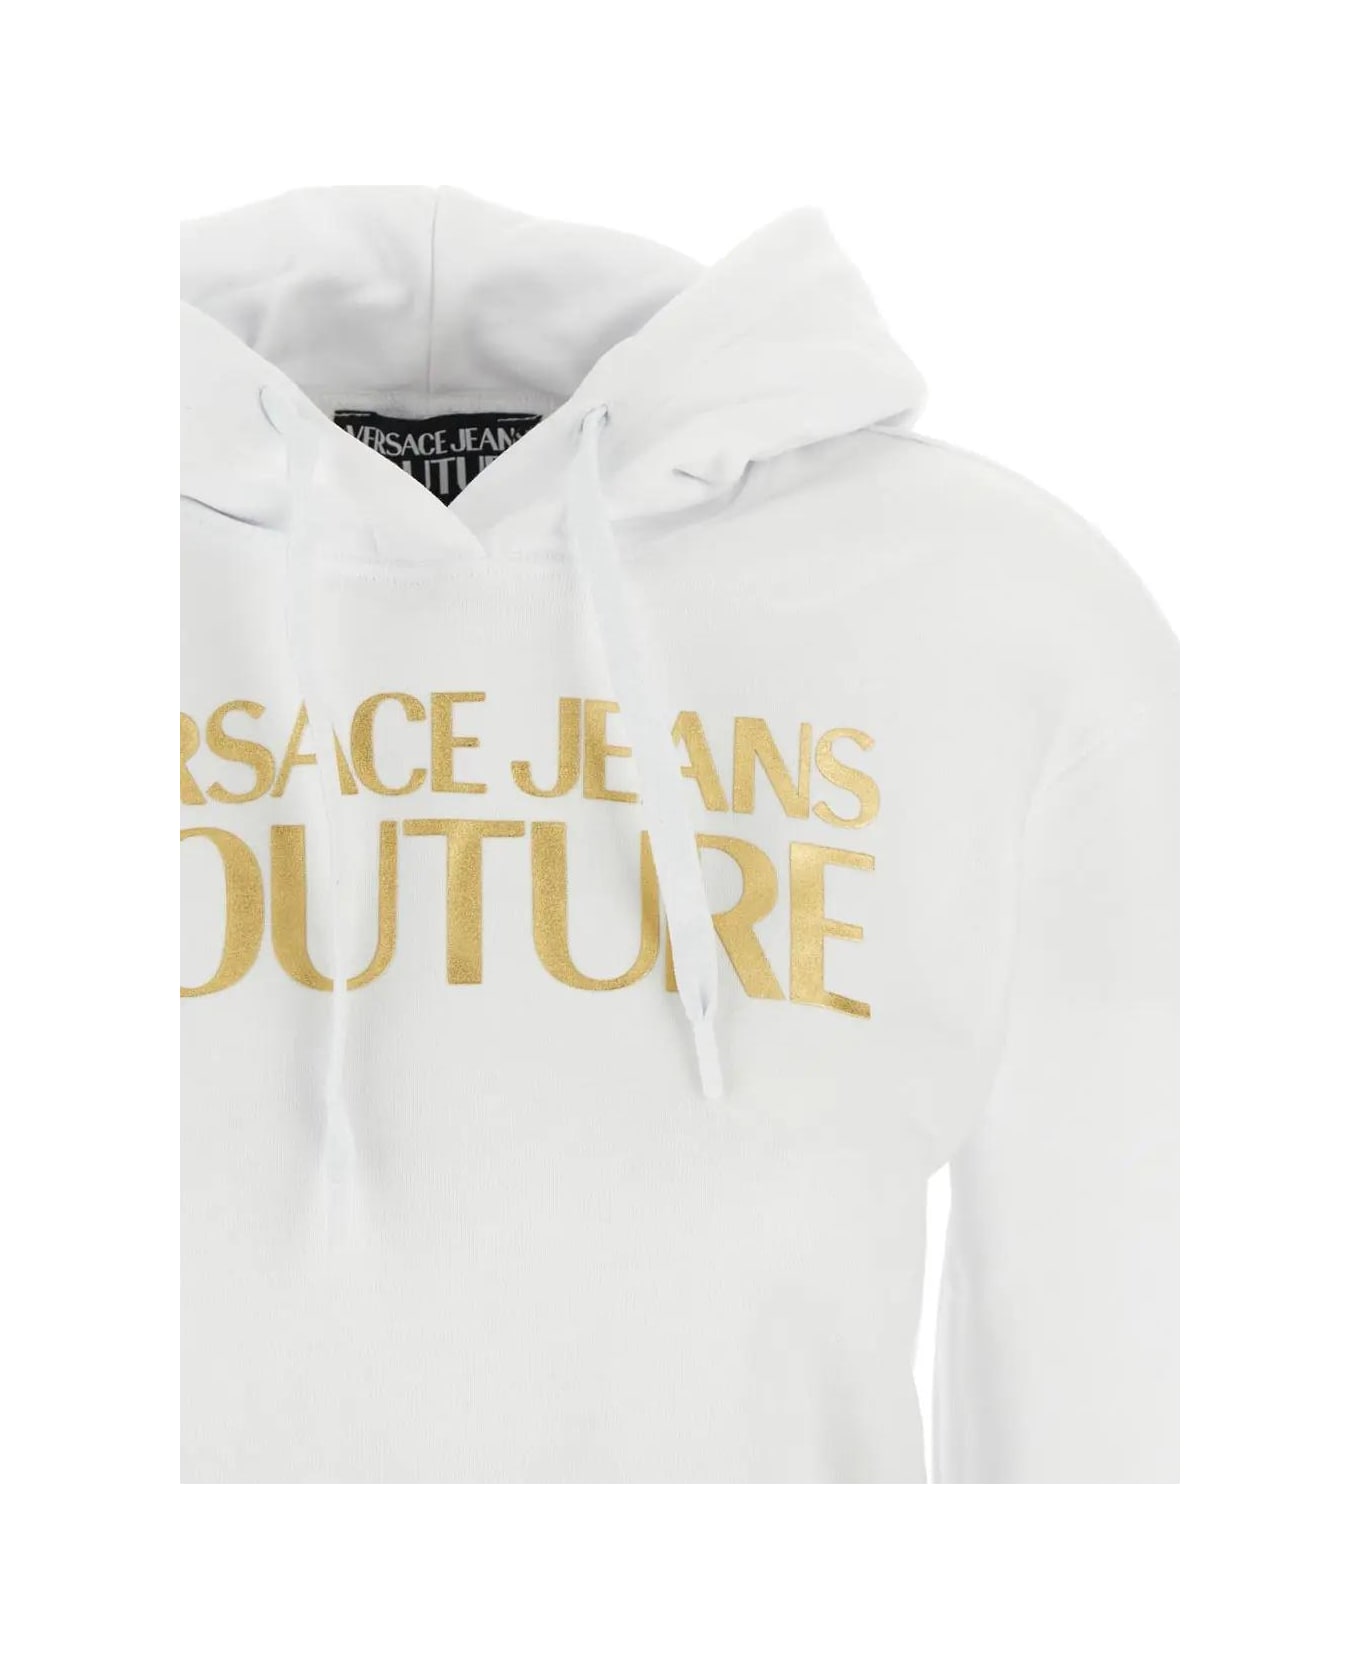 Versace Jeans Couture Logo Hoodie - White